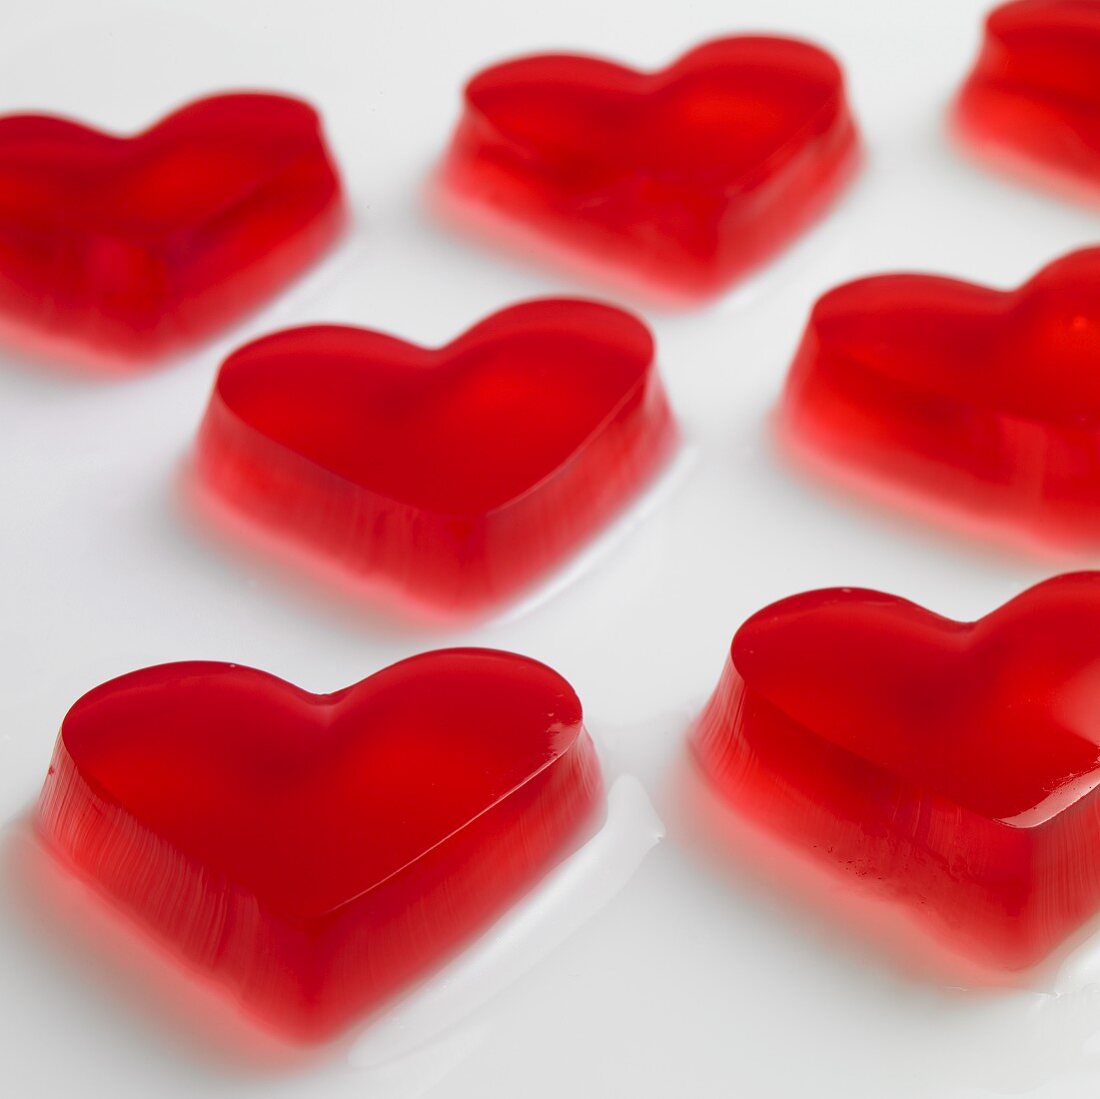 Red jelly hearts (close-up)